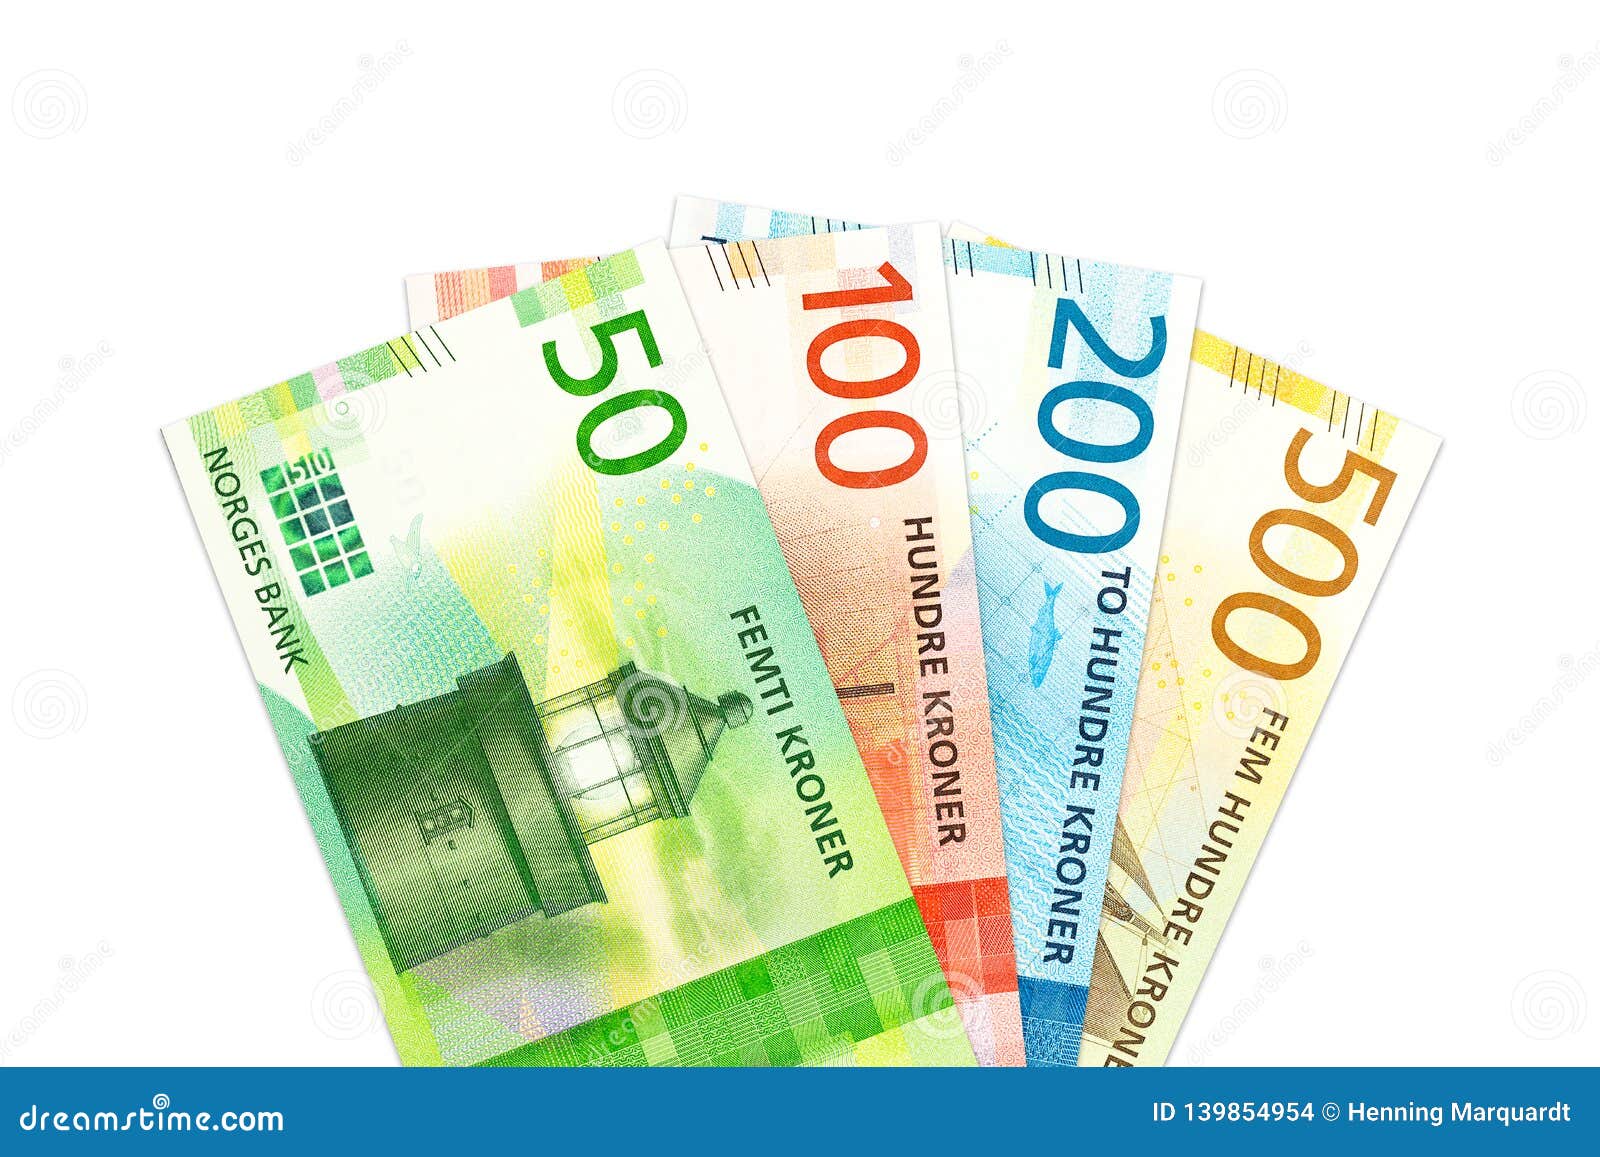 This Is What Norway S Money Will Look Like In 2017